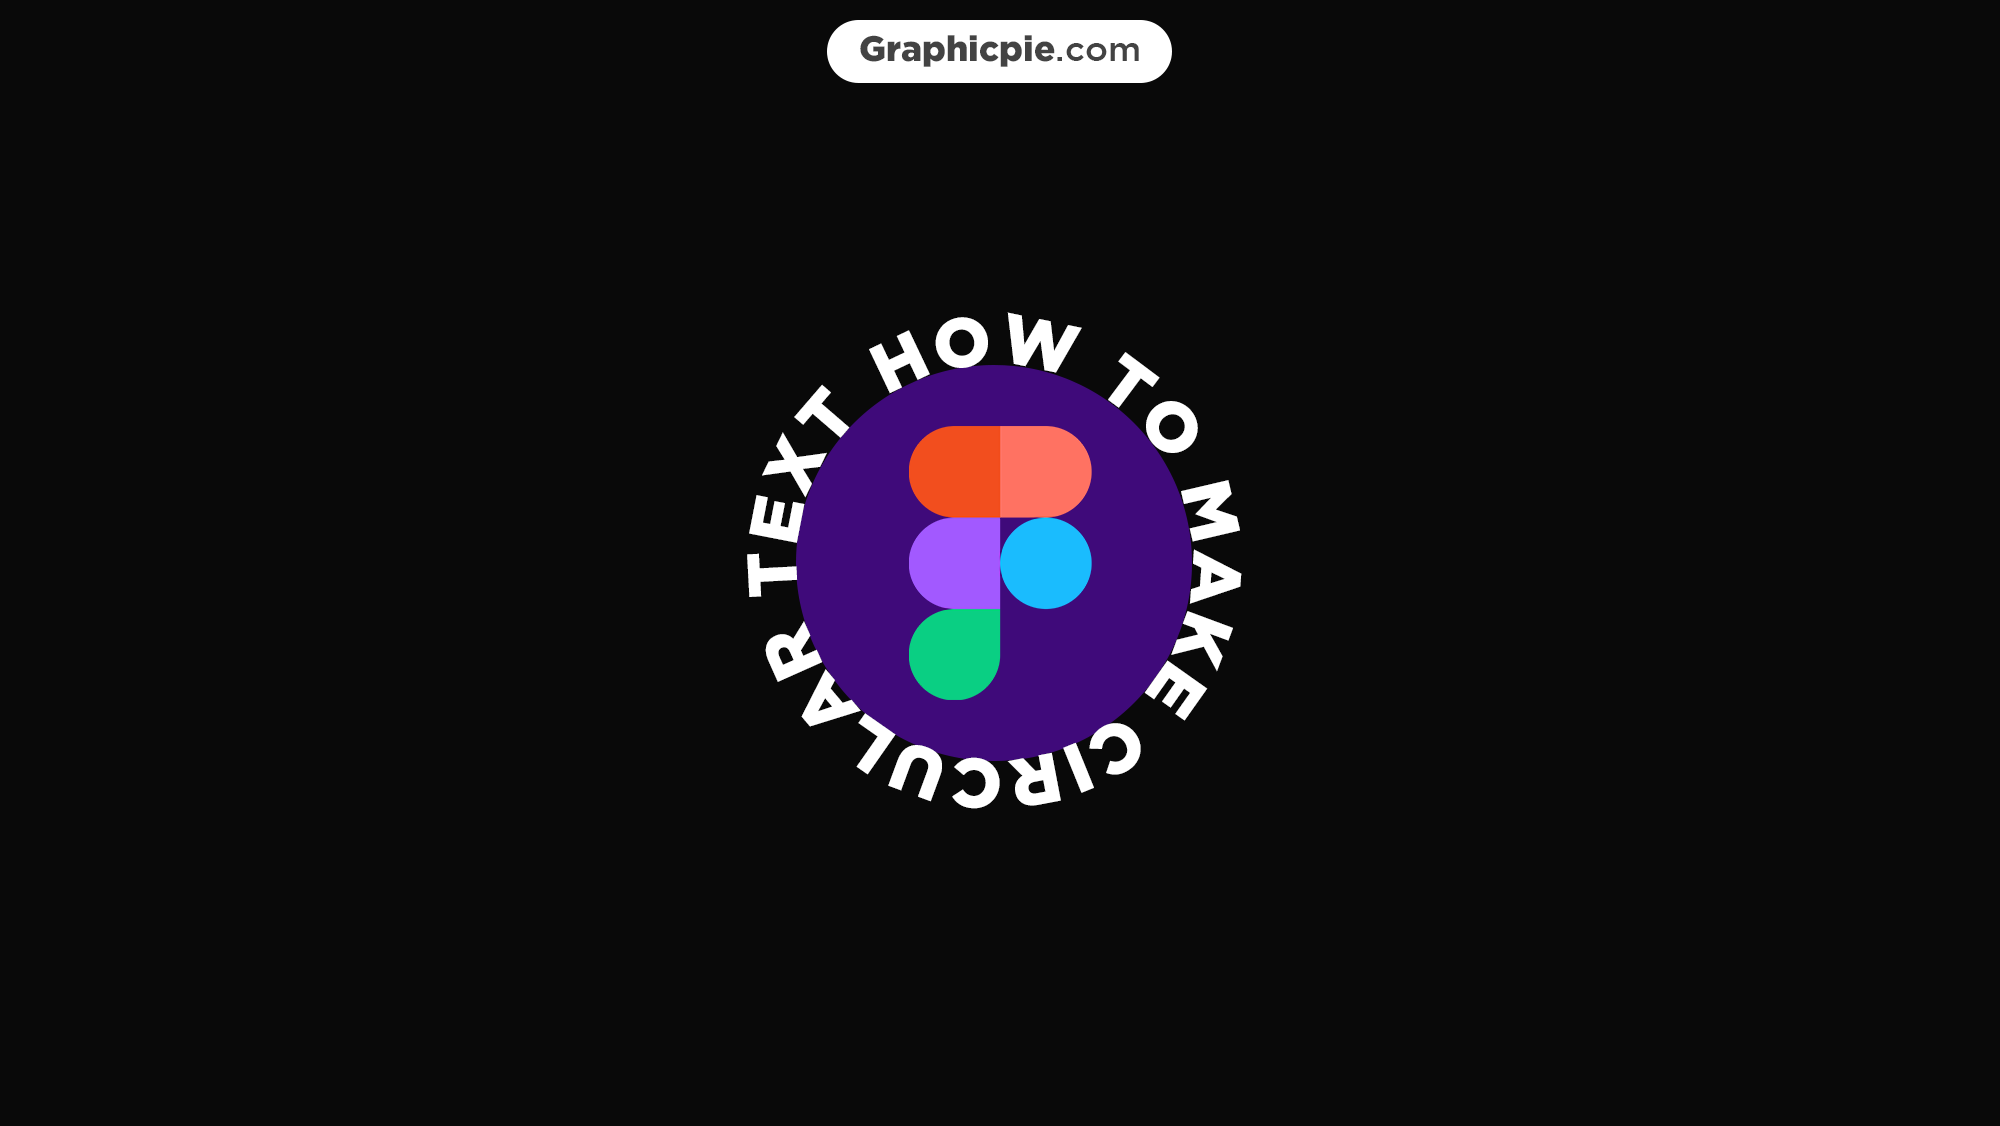 how-to-draw-circles-in-microsoft-word-elementchampionship-jeffcoocctax